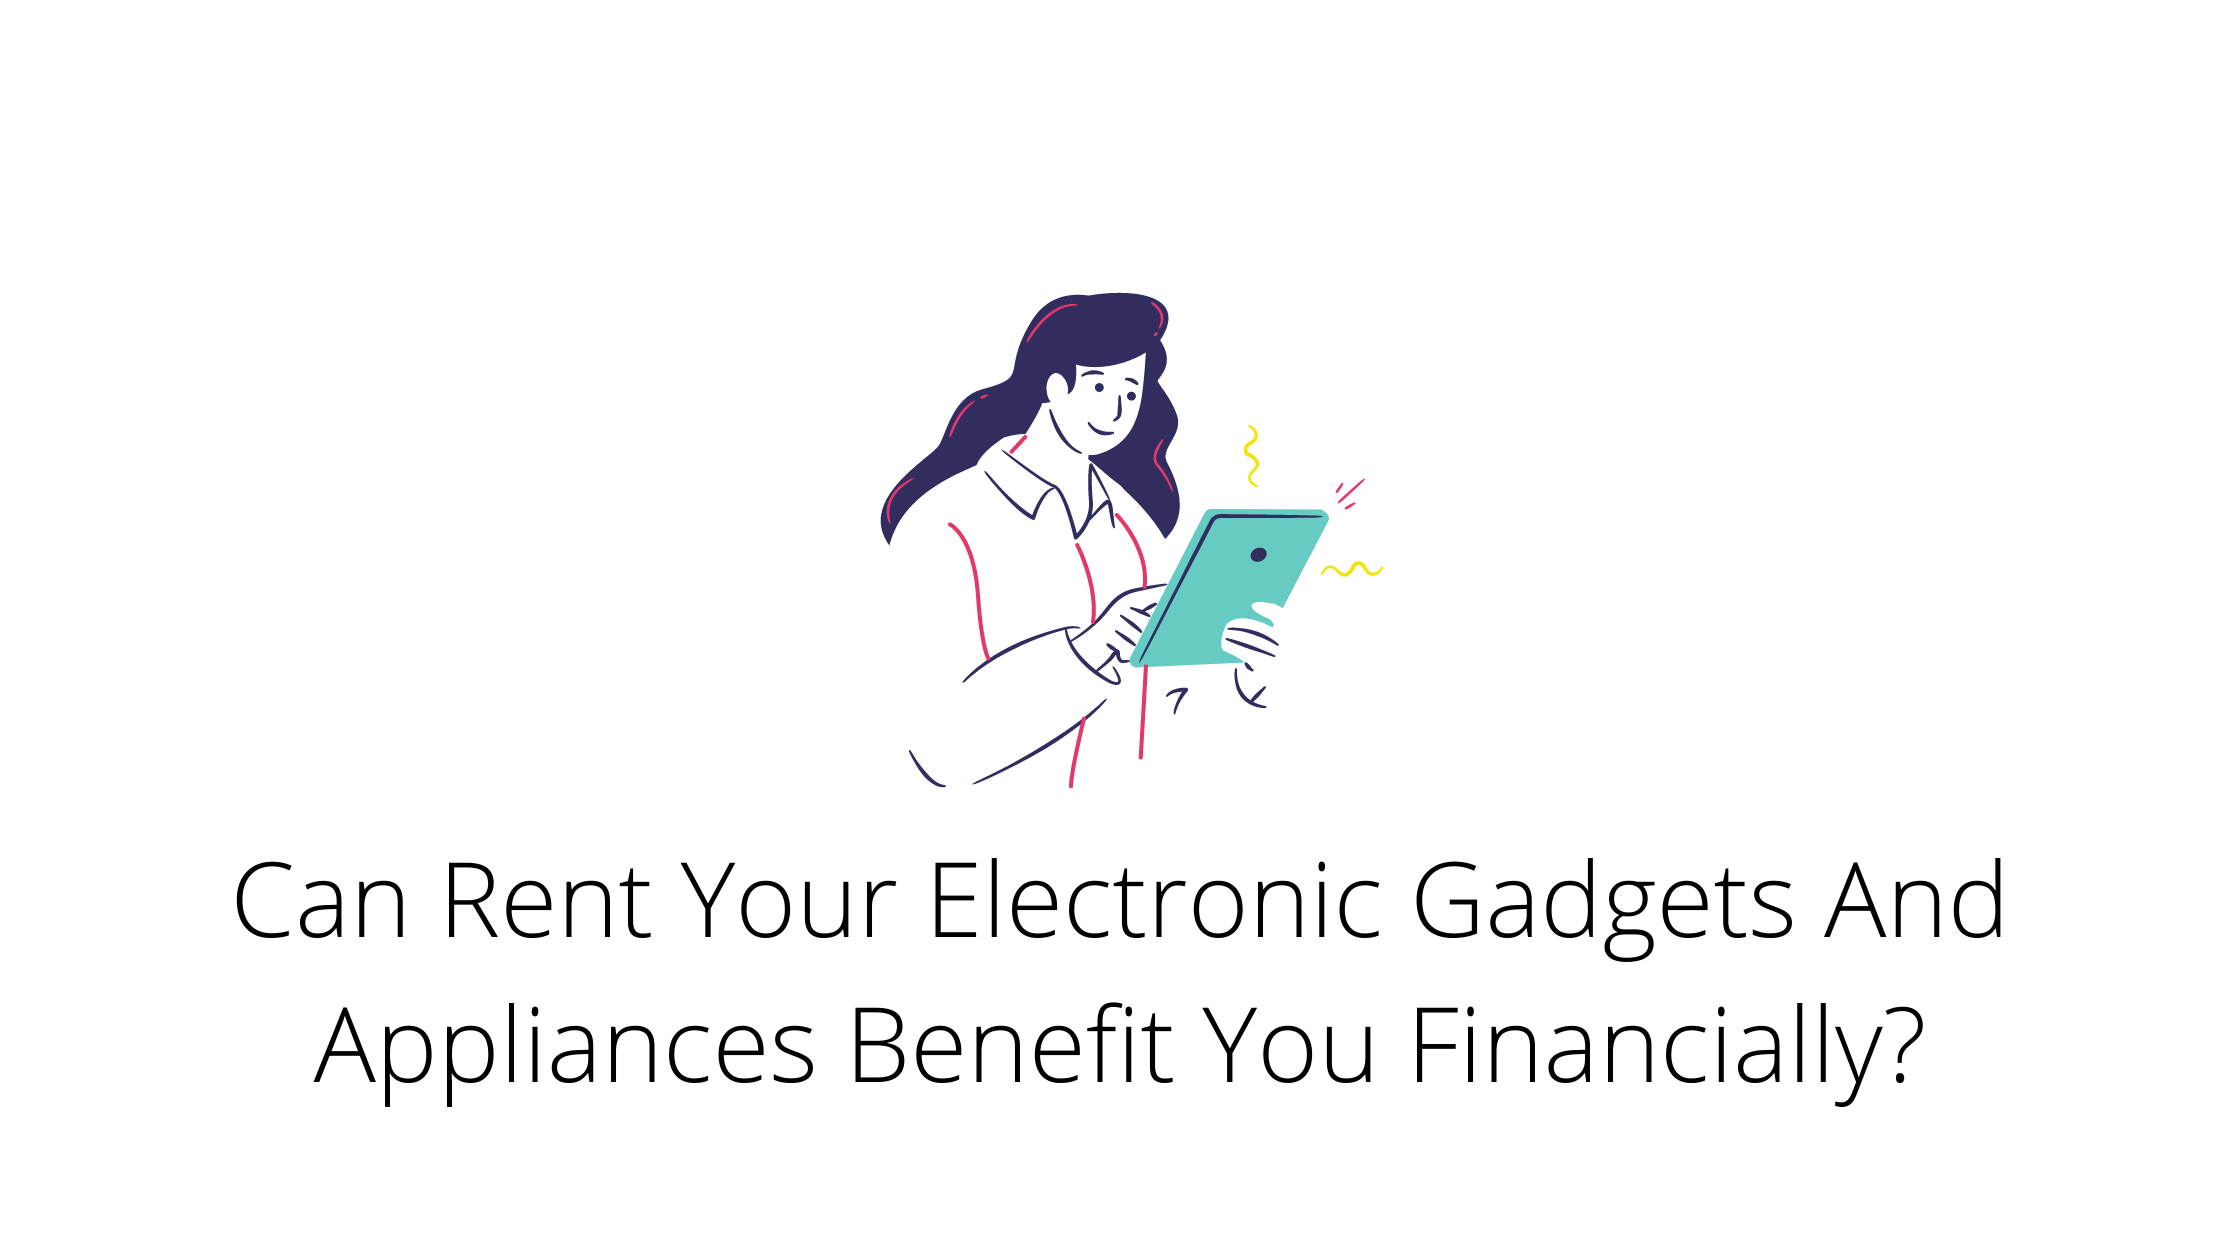 Can Rent Your Electronic Gadgets And Appliances Benefit You Financially?